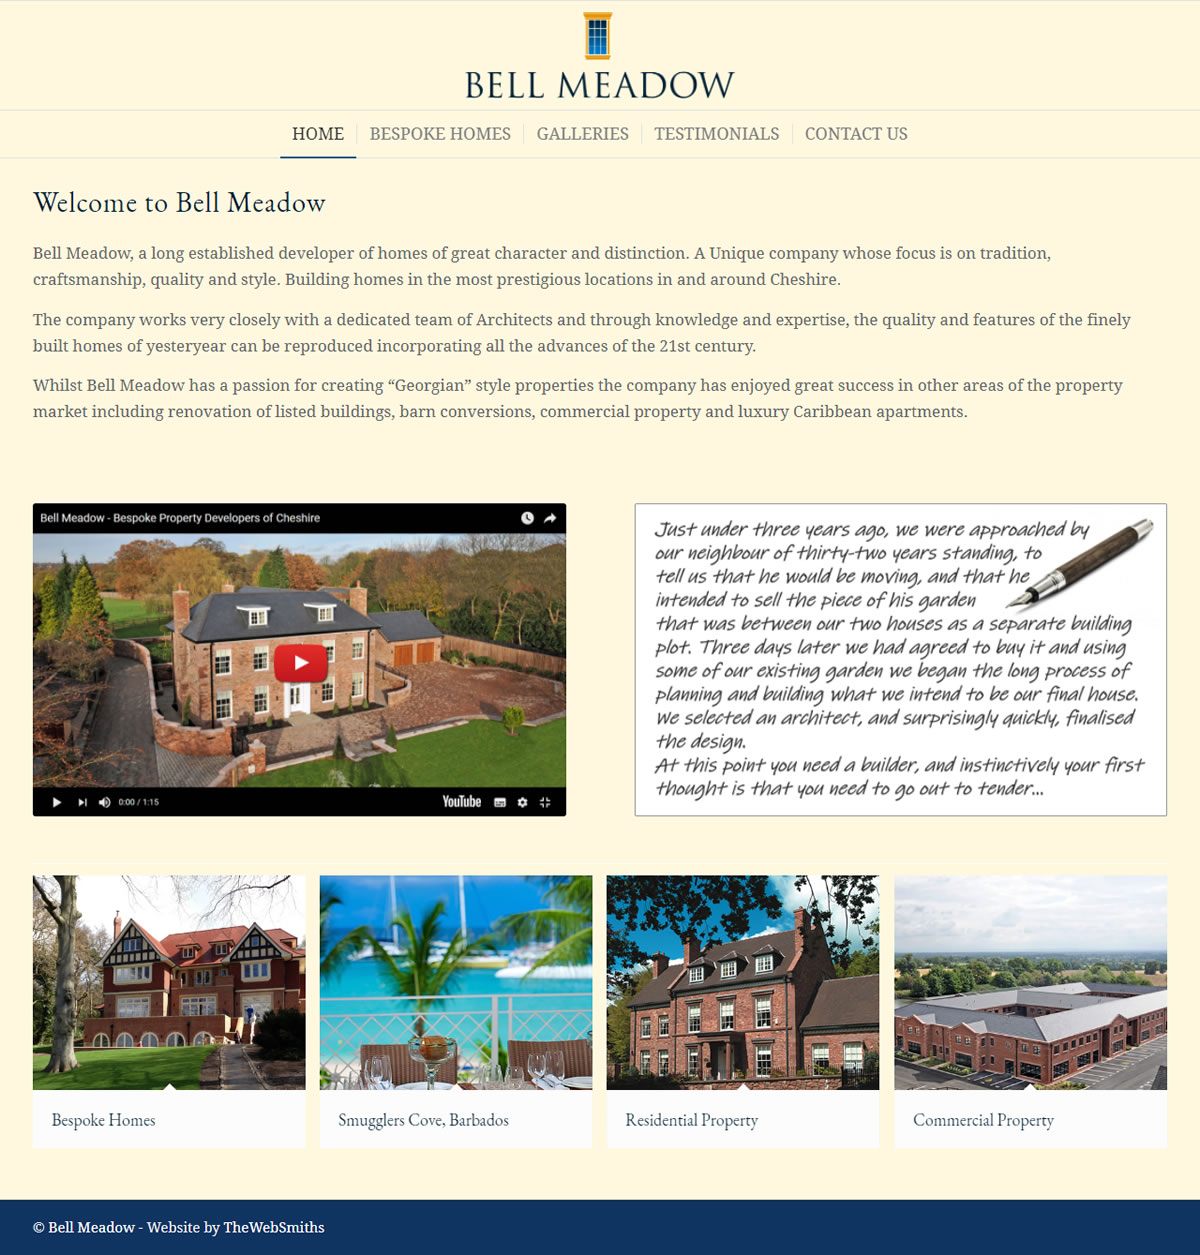 A new website for Bell Meadow